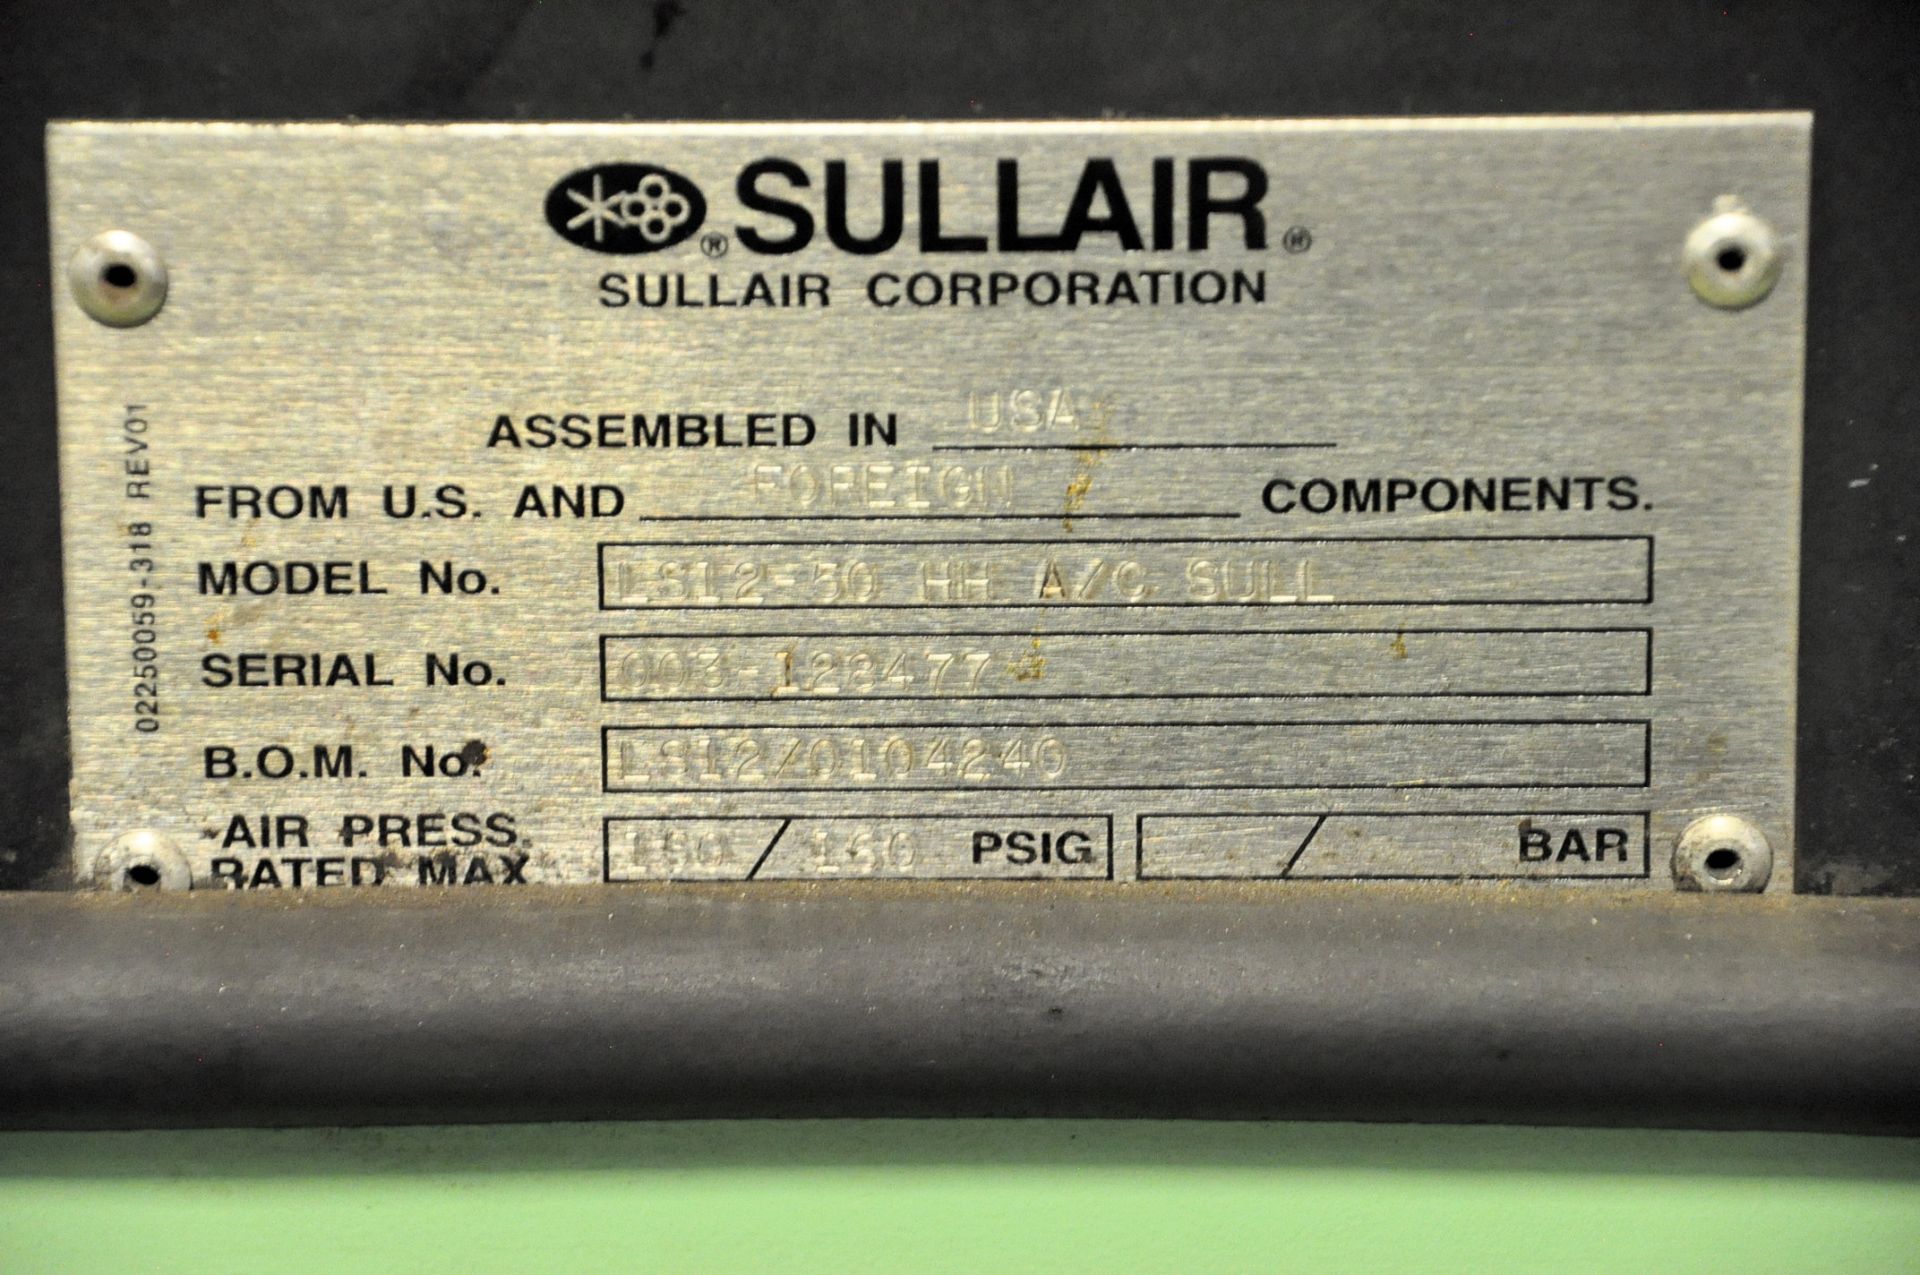 SULLAIR MODEL L612-30 HH A/C SULL 30-HP 150-PSI Rotary Screw Packaged Air Compressor - Image 4 of 4